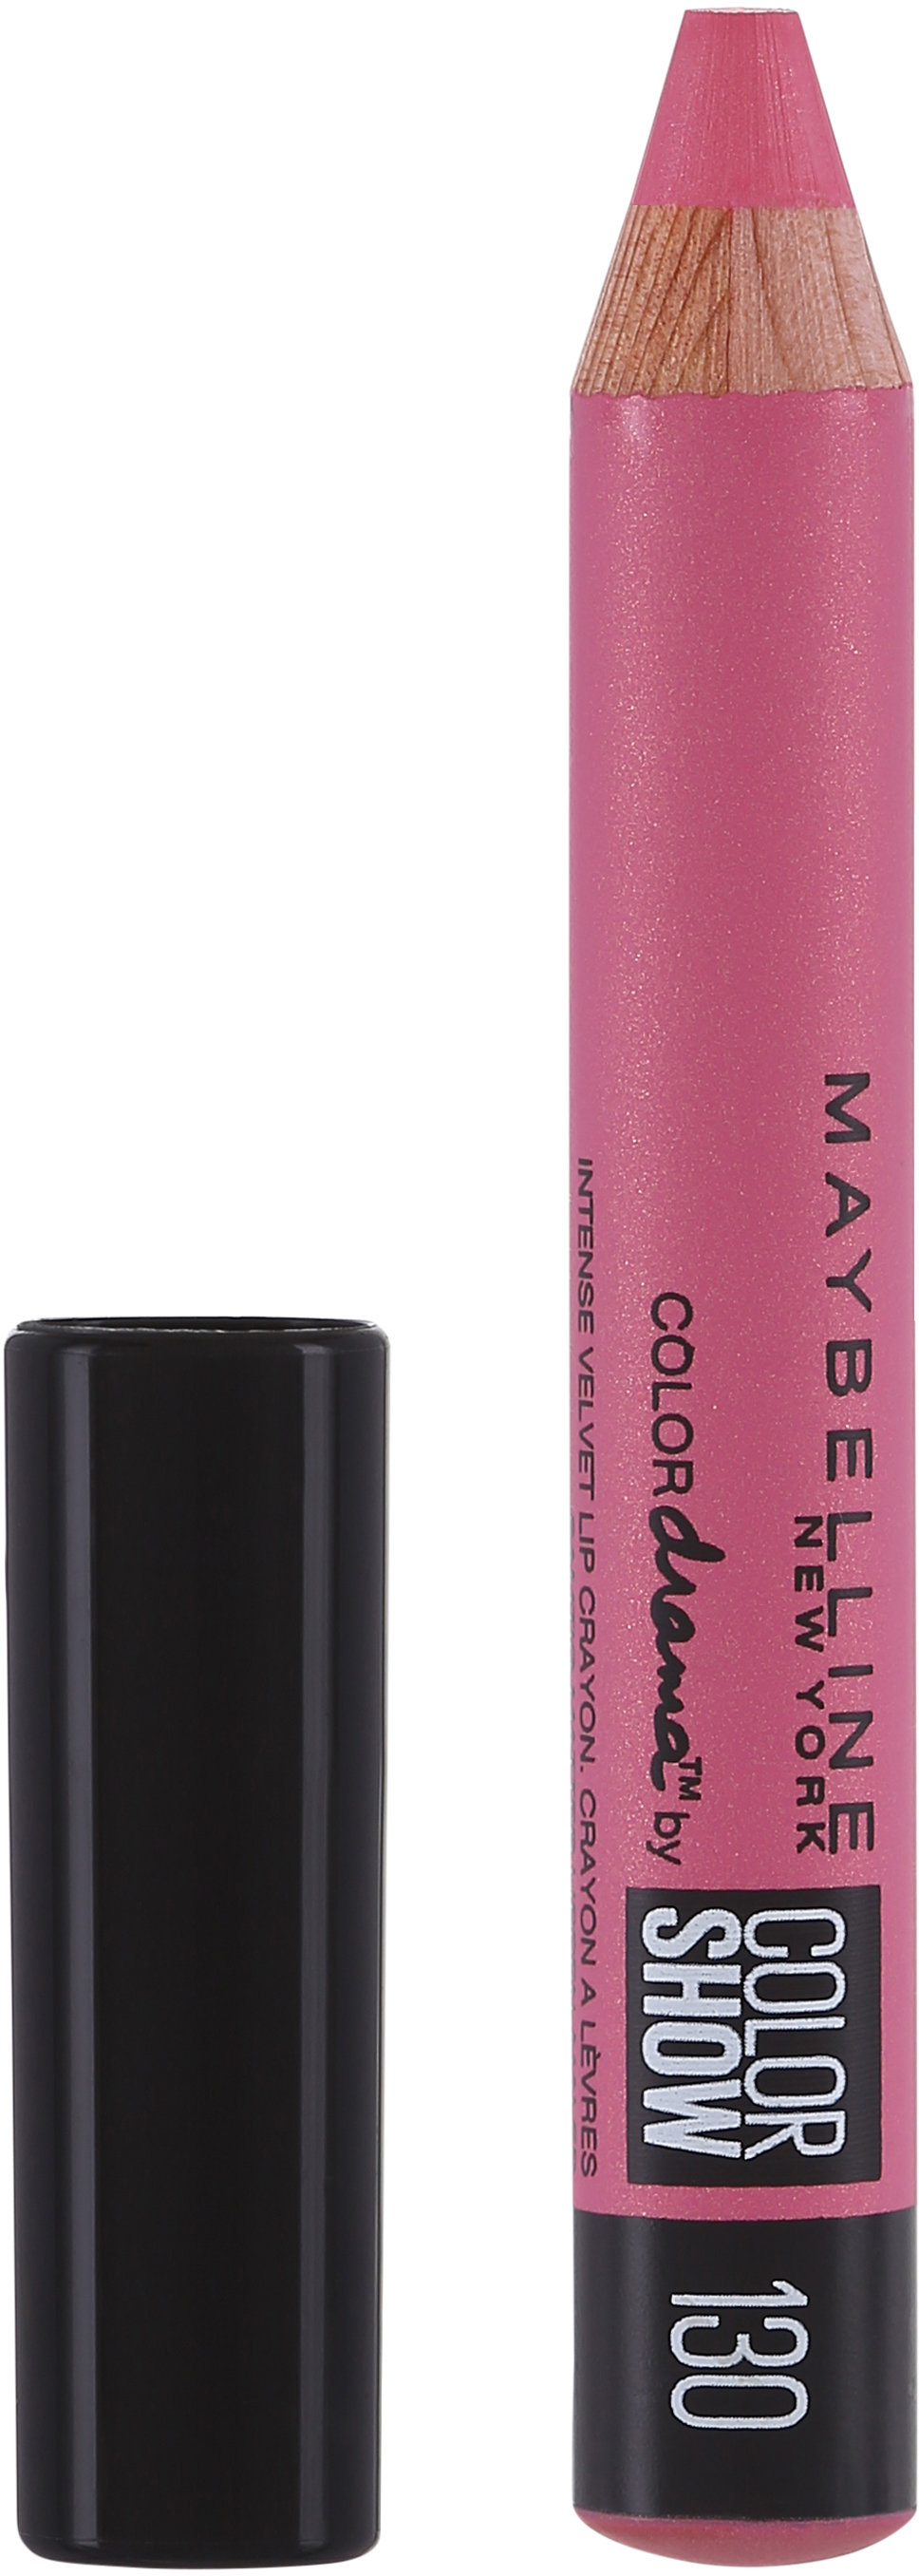 Maybelline Color Drama Lips 130 Love My Pink